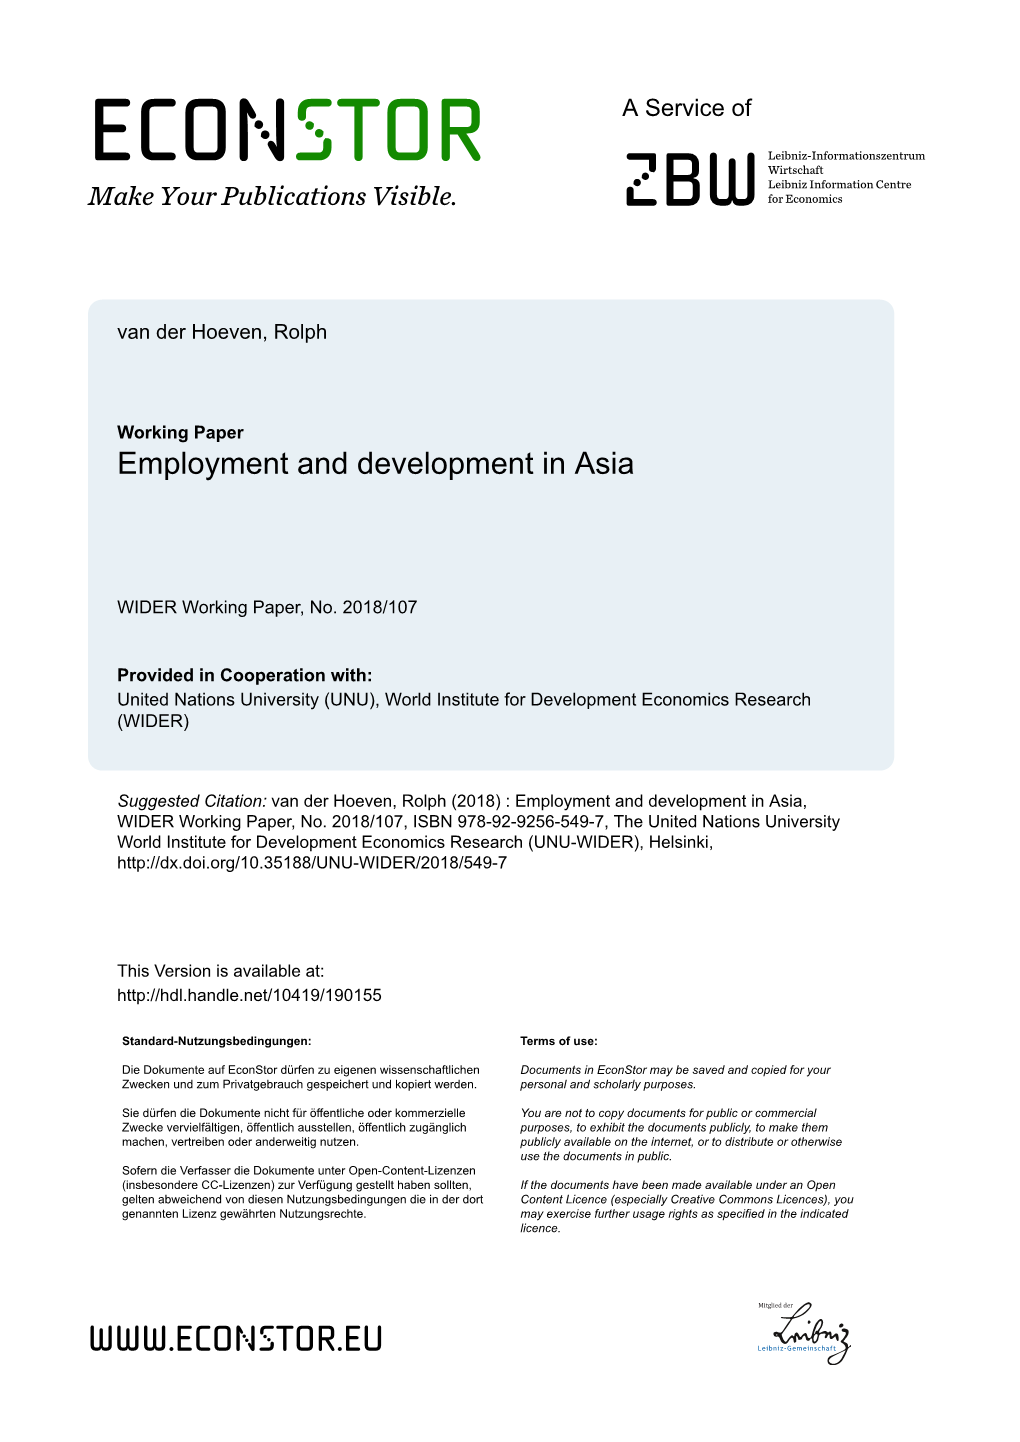 WIDER Working Paper 2018/107: Employment and Development in Asia